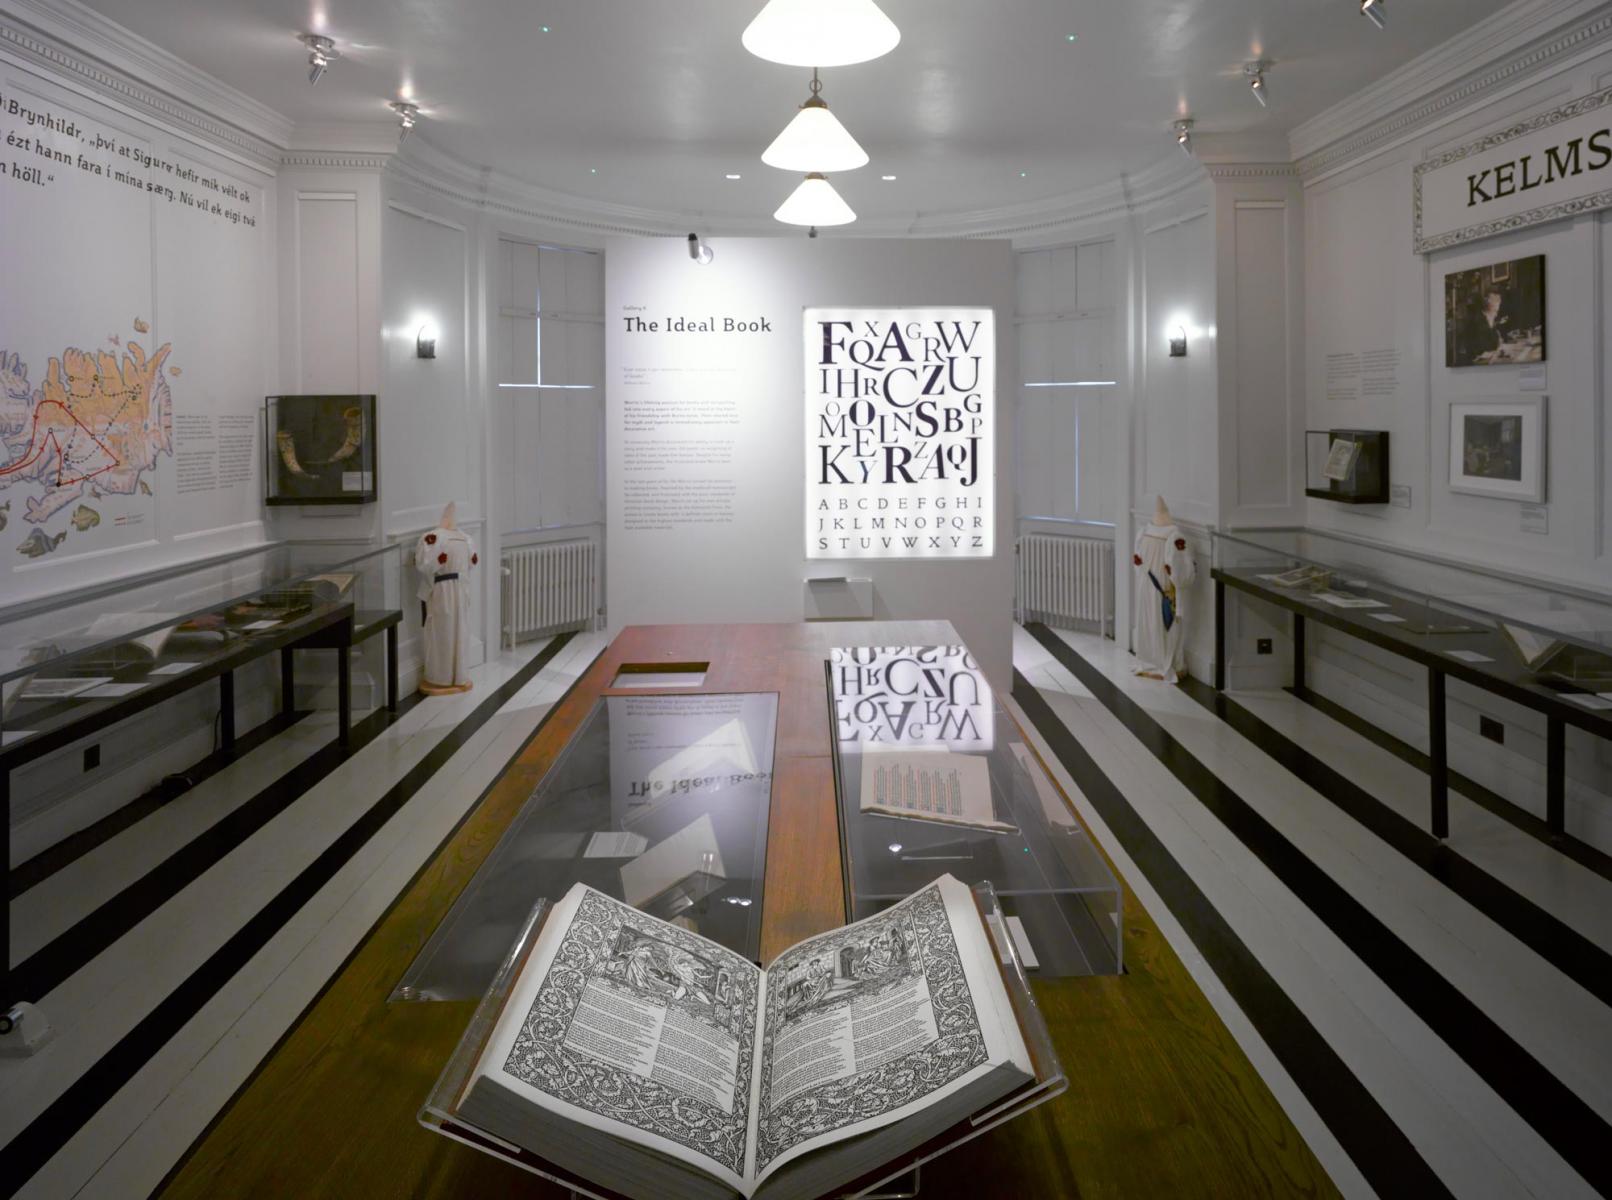 William Morris Gallery, Walthamstow, London - The ideal Book